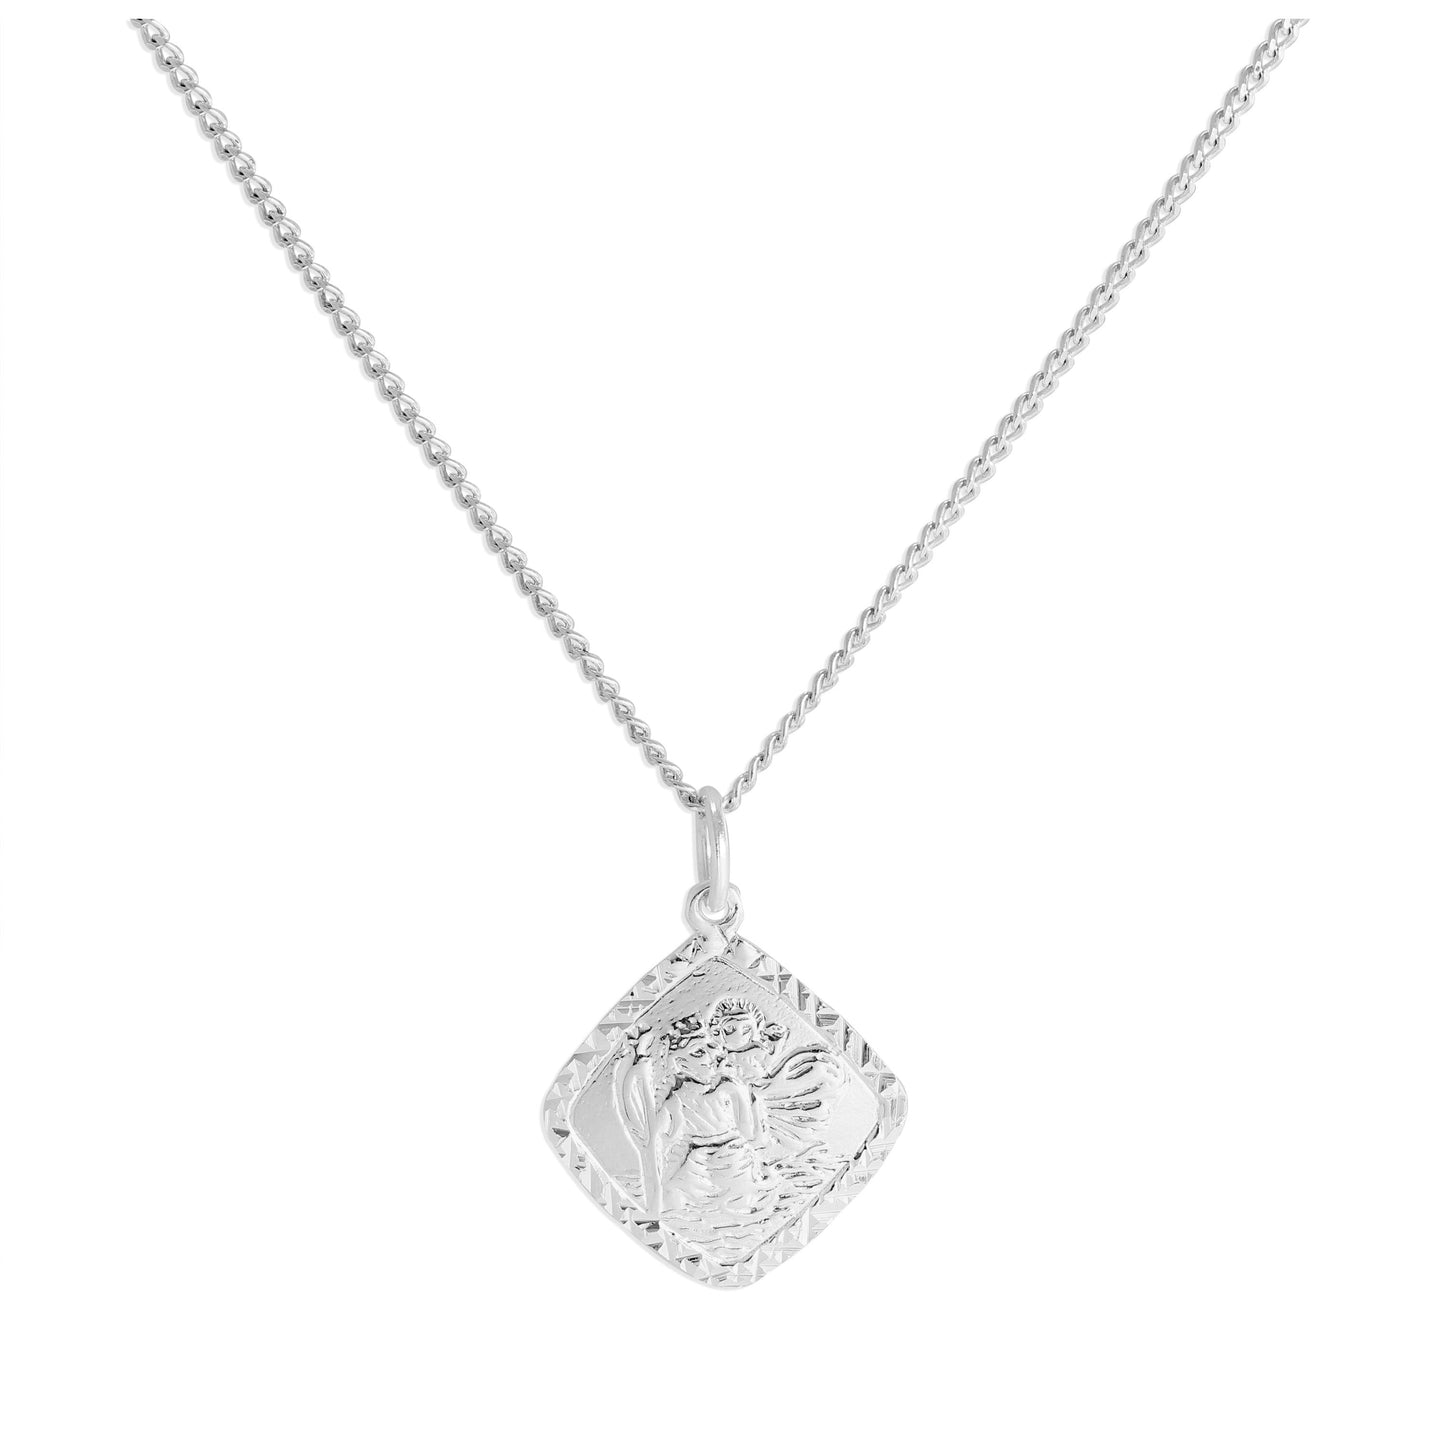 Sterling Silver Diamond Cut Square St Christopher Necklace 16 - 24 Inches